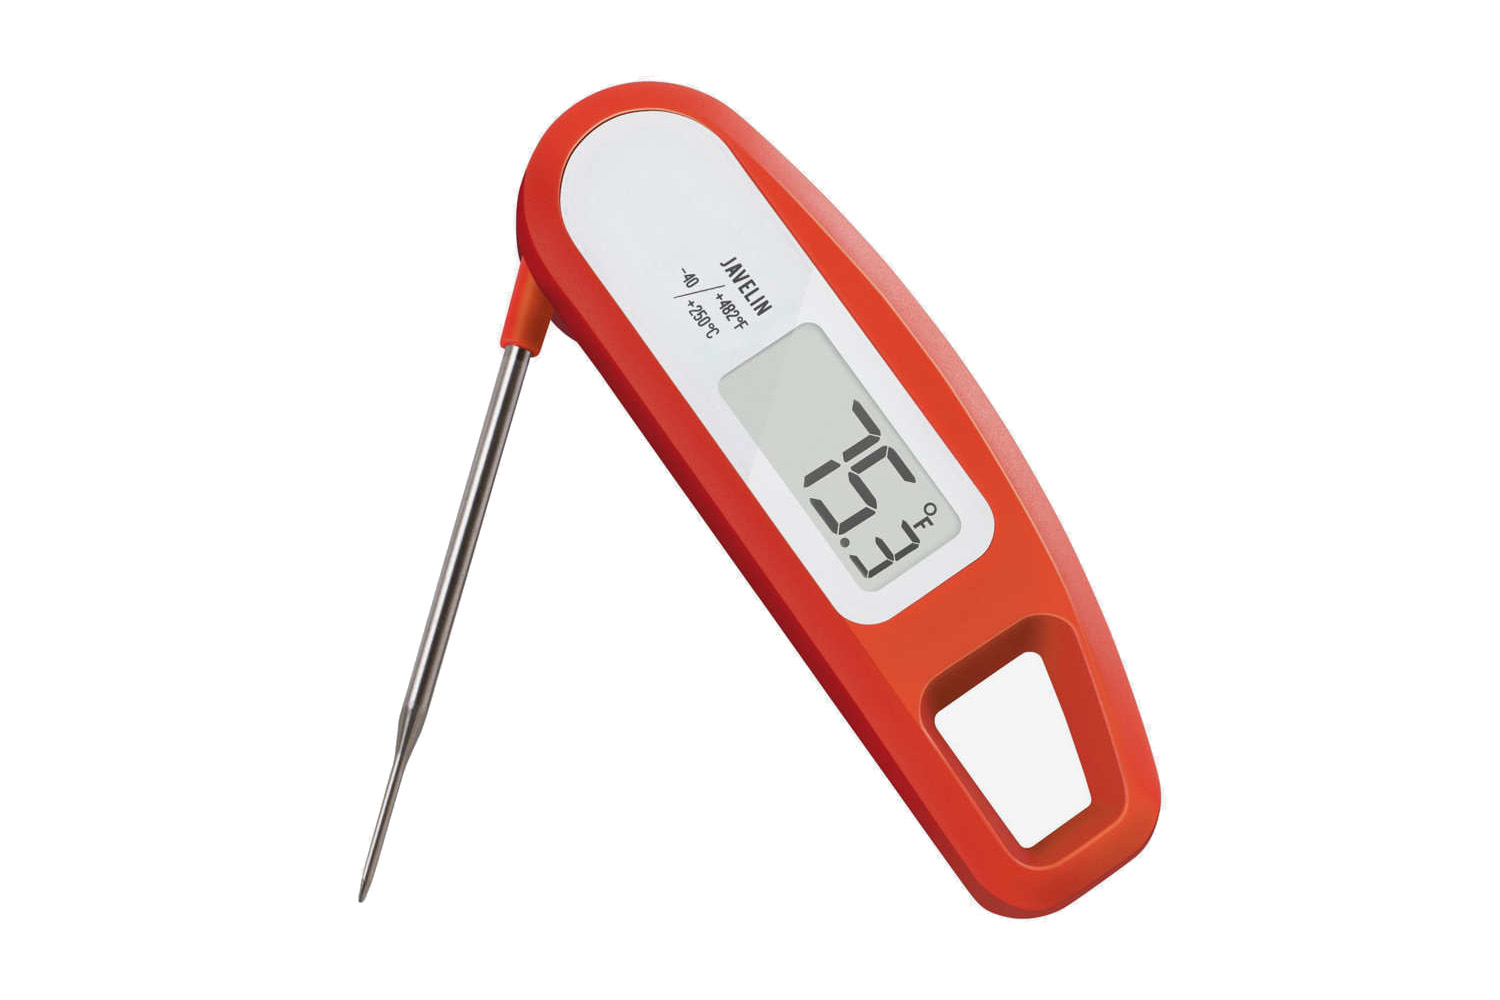 https://www.themanual.com/wp-content/uploads/sites/9/2019/01/thermopro-tp03a-digital-instant-read-meat-thermometer.jpg?fit=800%2C533&p=1